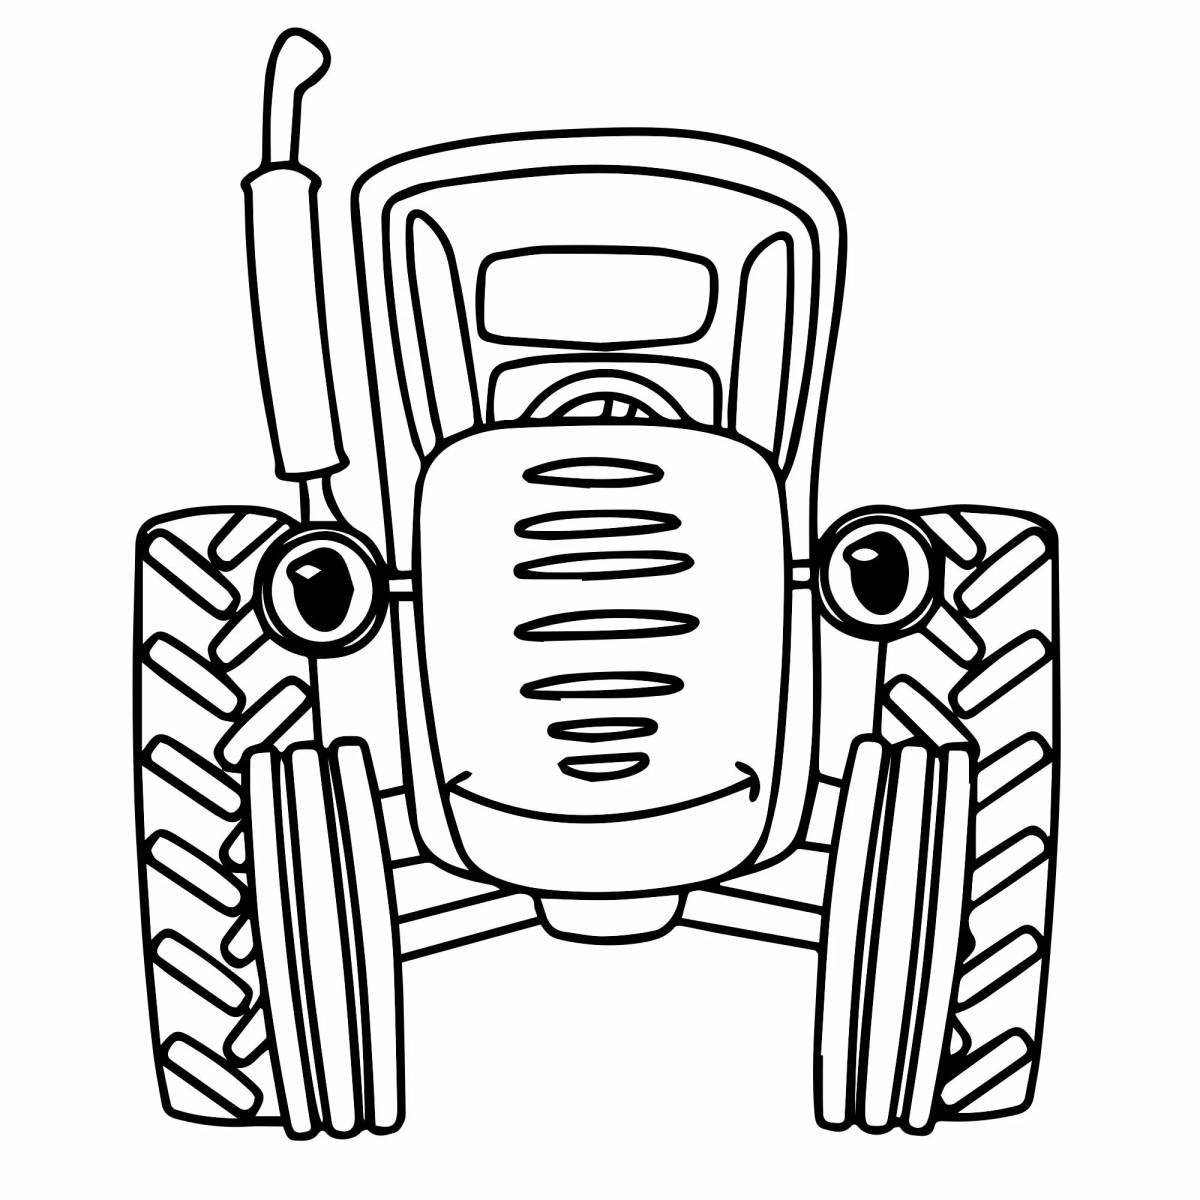 Coloring page joyful house blue tractor